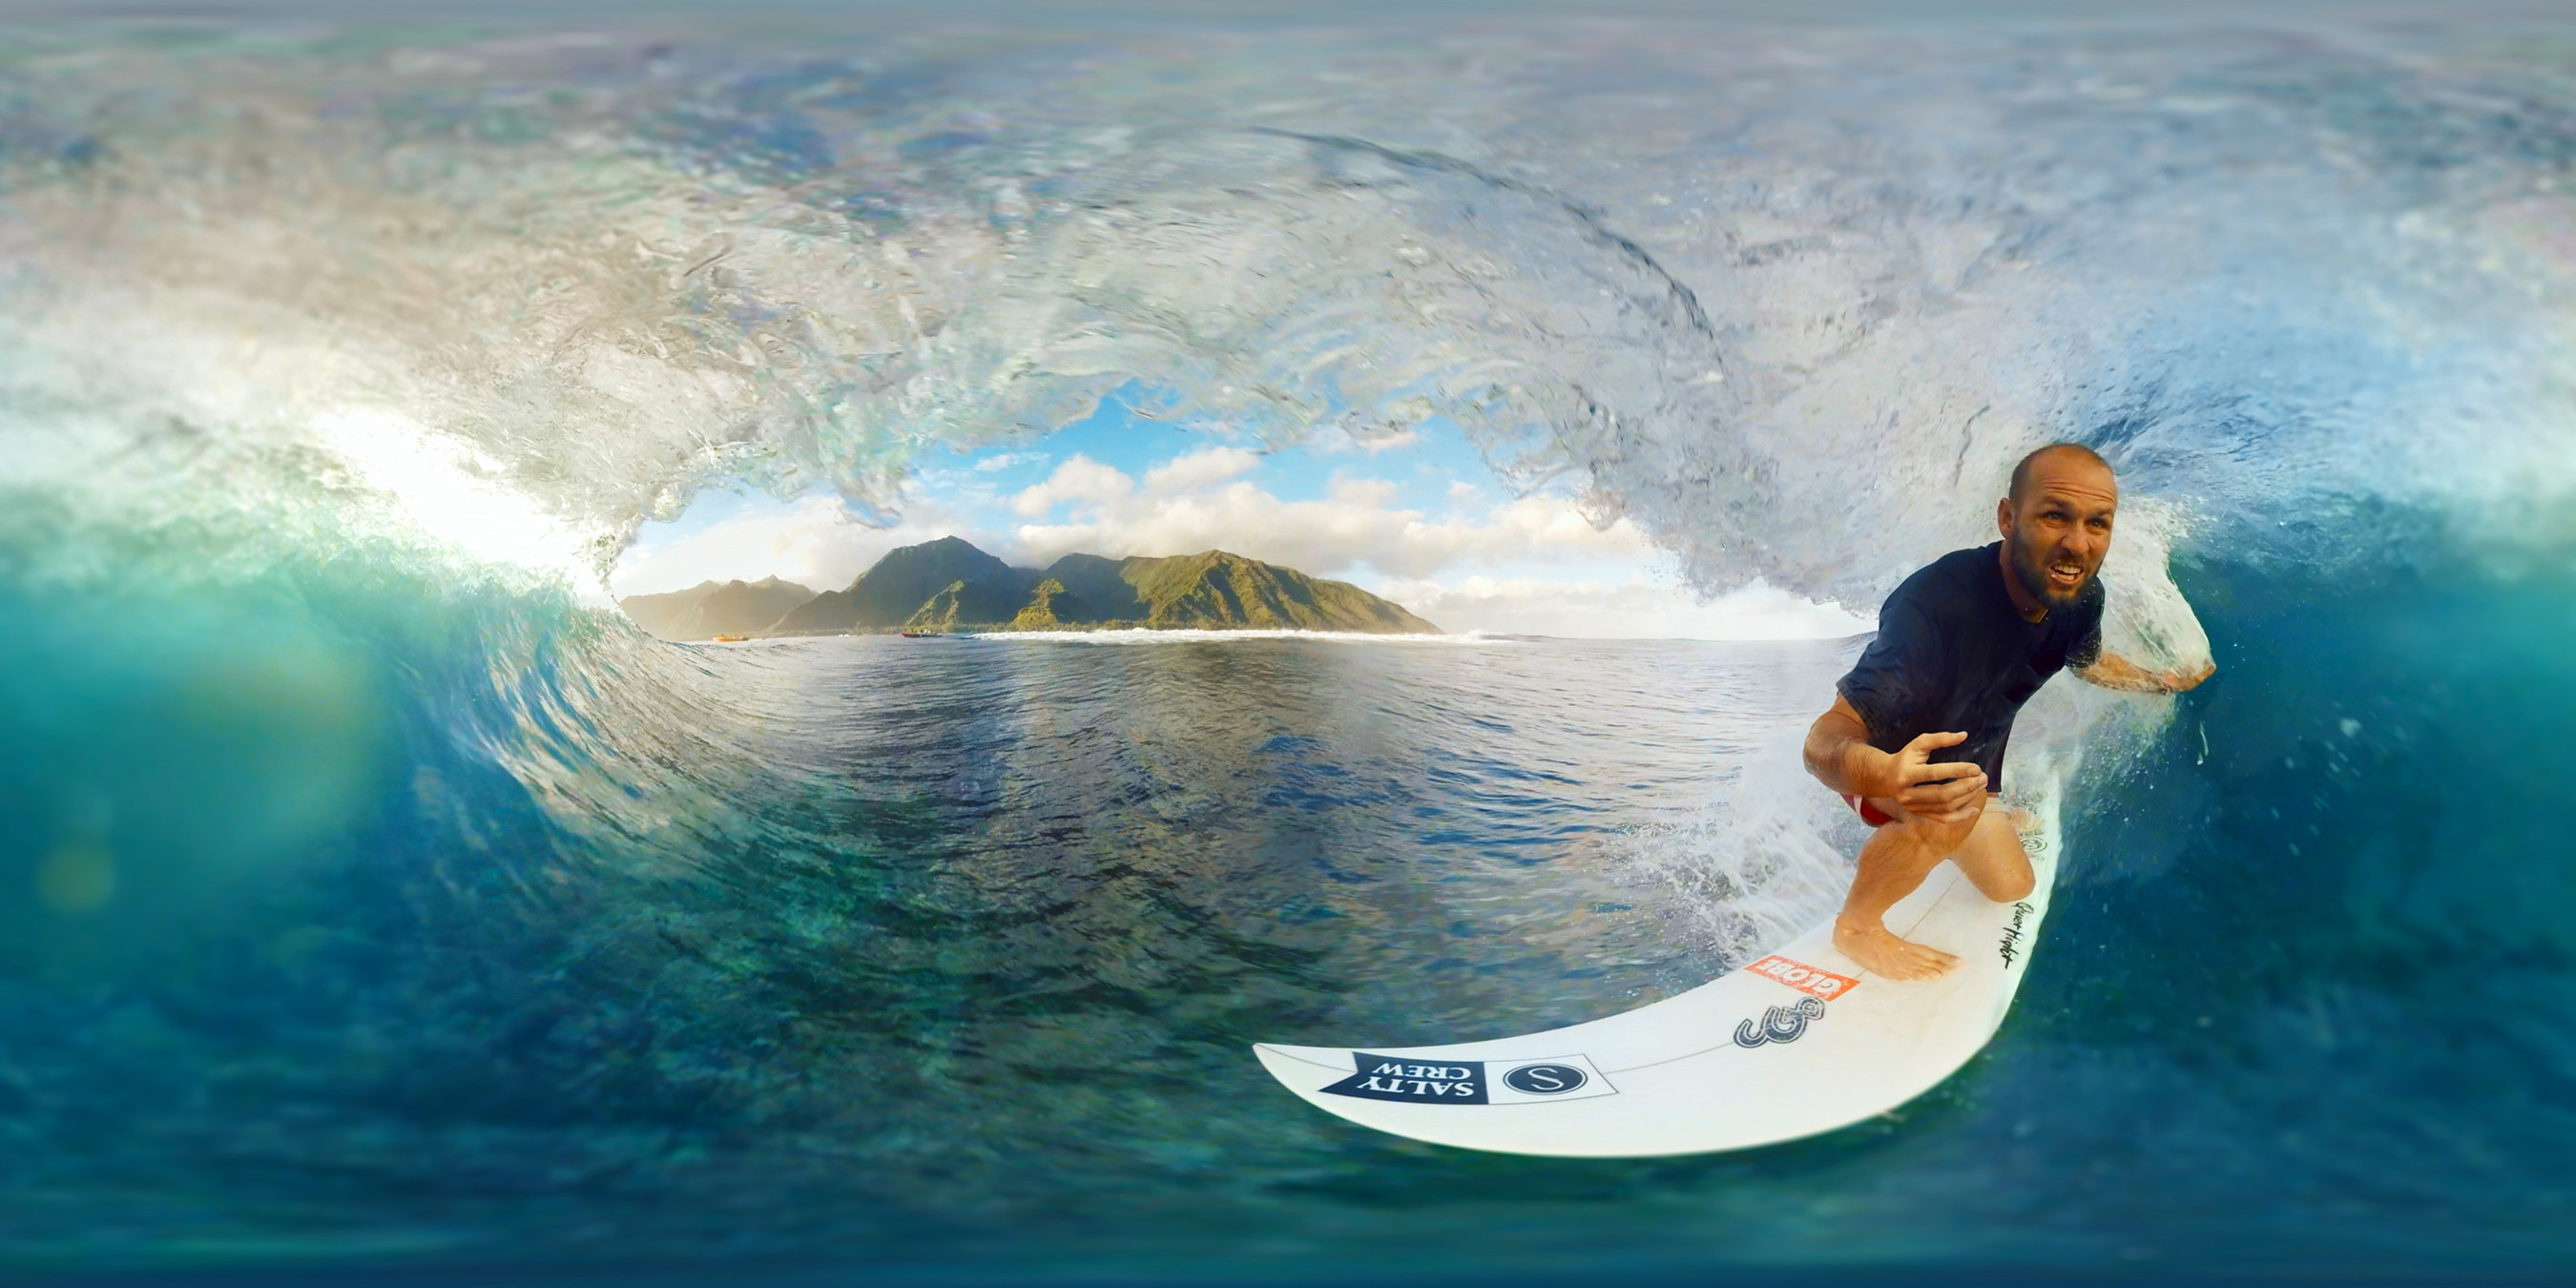 Frame grab of WSL Champion C.J. Hobgood partnering with Director Taylor Steele and Samsung Gear VR Innovator Edition to take the world inside of Tahiti's Teahupo'o. Now playing LIVE at WorldSurfLeague.com, Image: WSL / Samsung